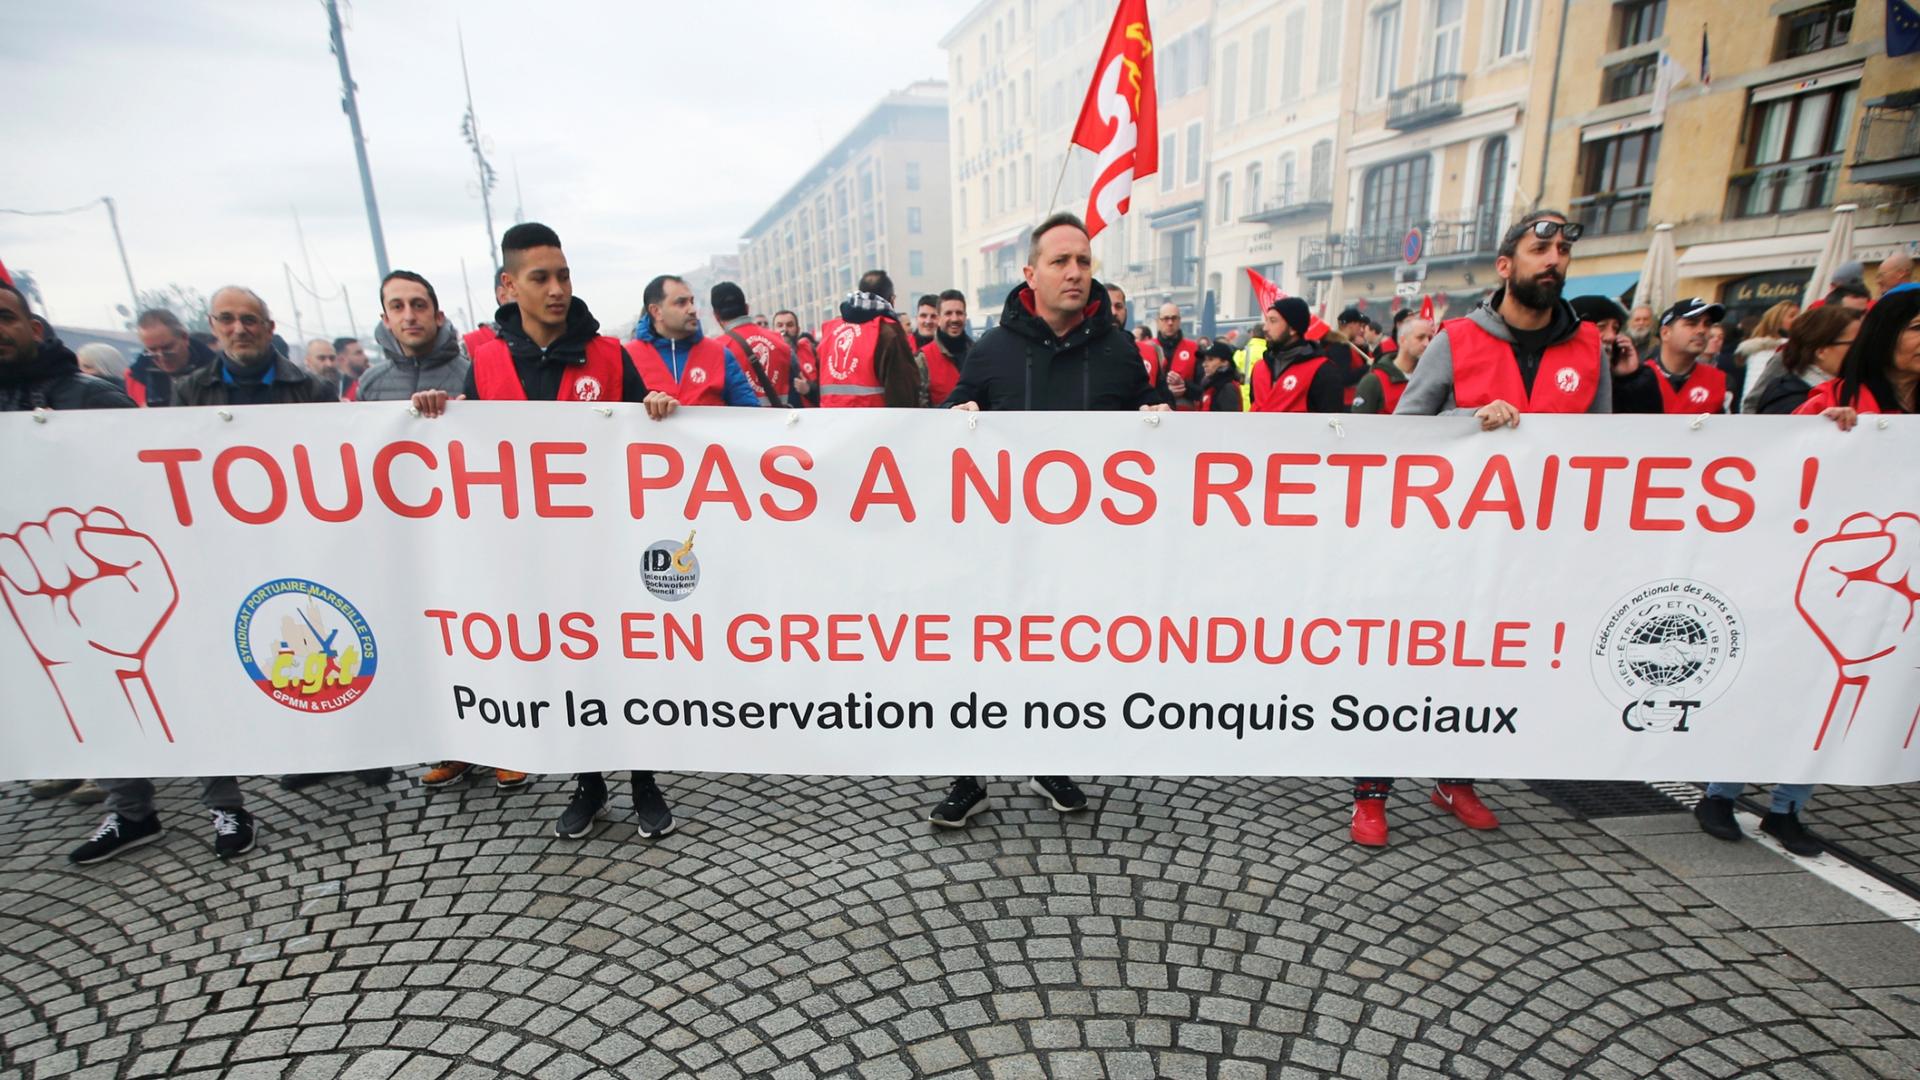 A large group of protesters are shown in the street holding a banner during a demonstration in Marseille. The banner reads, "Don't touch my pension."